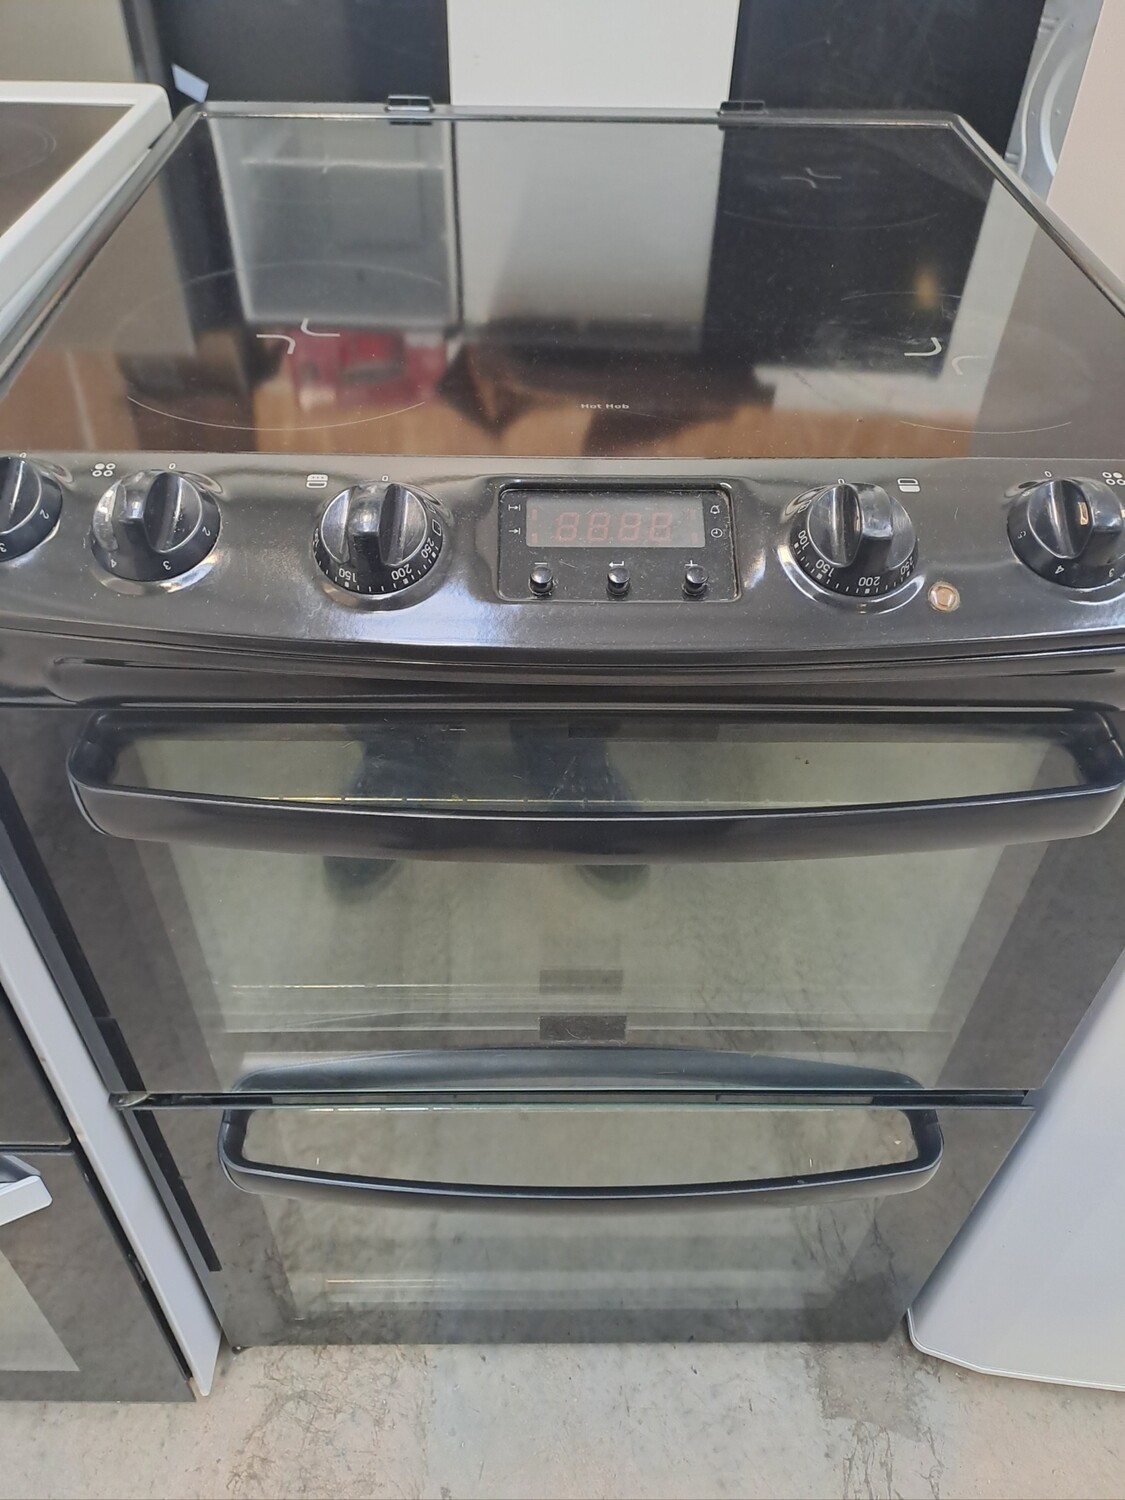 Zanussi ZCV662MNC 60cm Electric cooker Twin Cavity Double Oven Ceramic Hob - Black - Refurbished + 6 month guarantee. This item is located in our Whitby Road Shop 